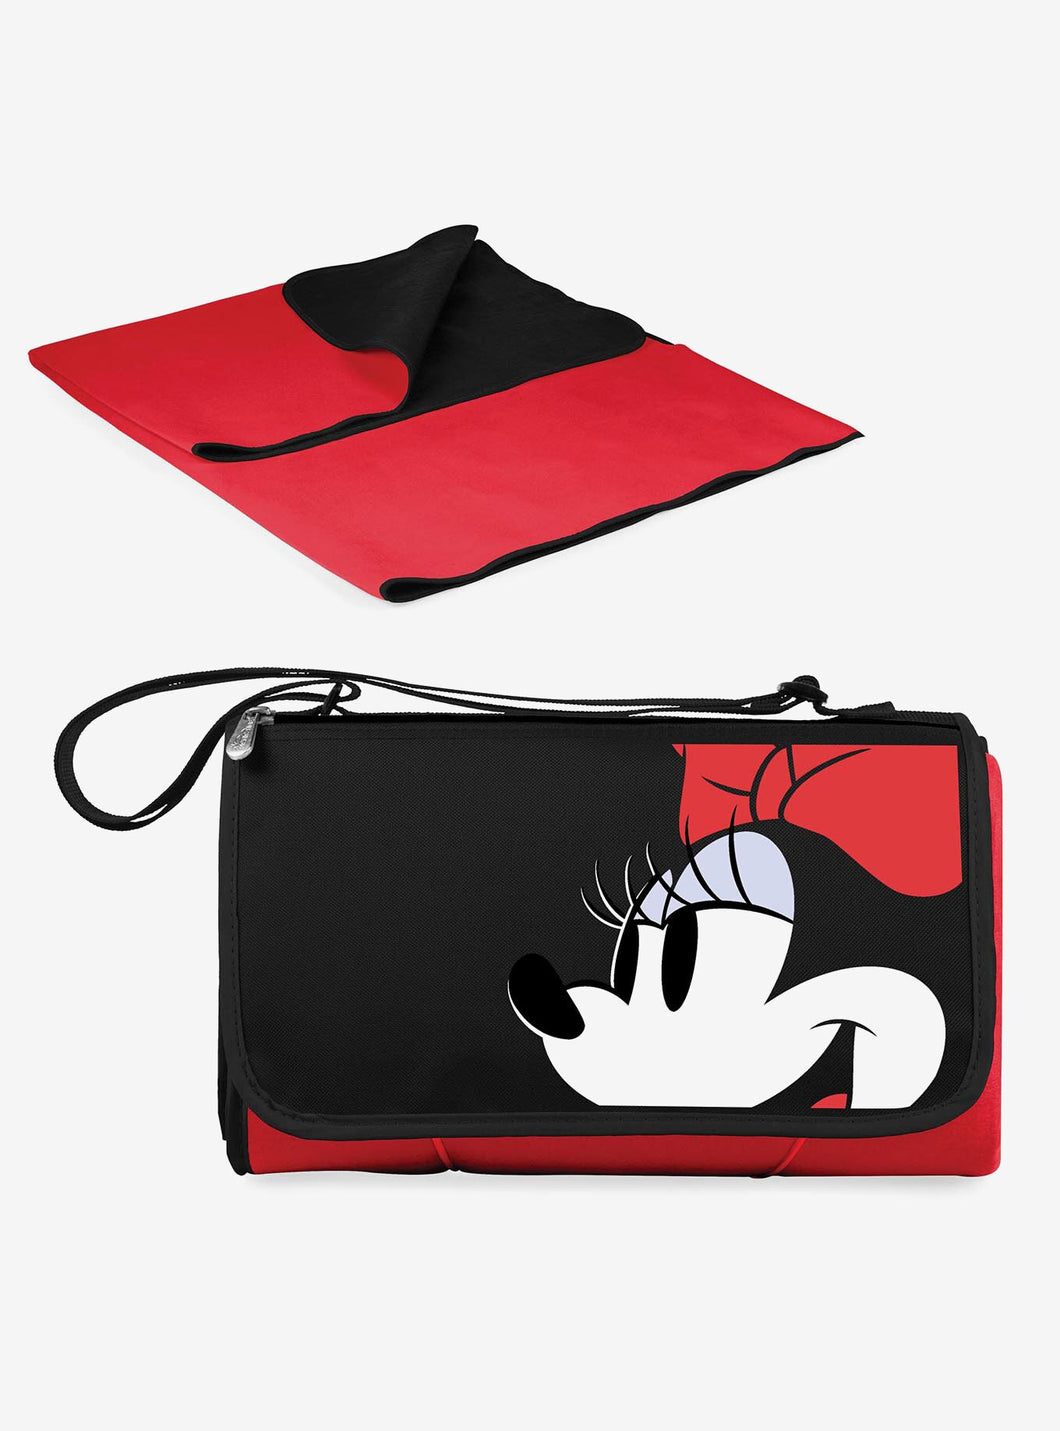 KIDS CORNER Minnie Mouse Outdoor Picnic Blanket